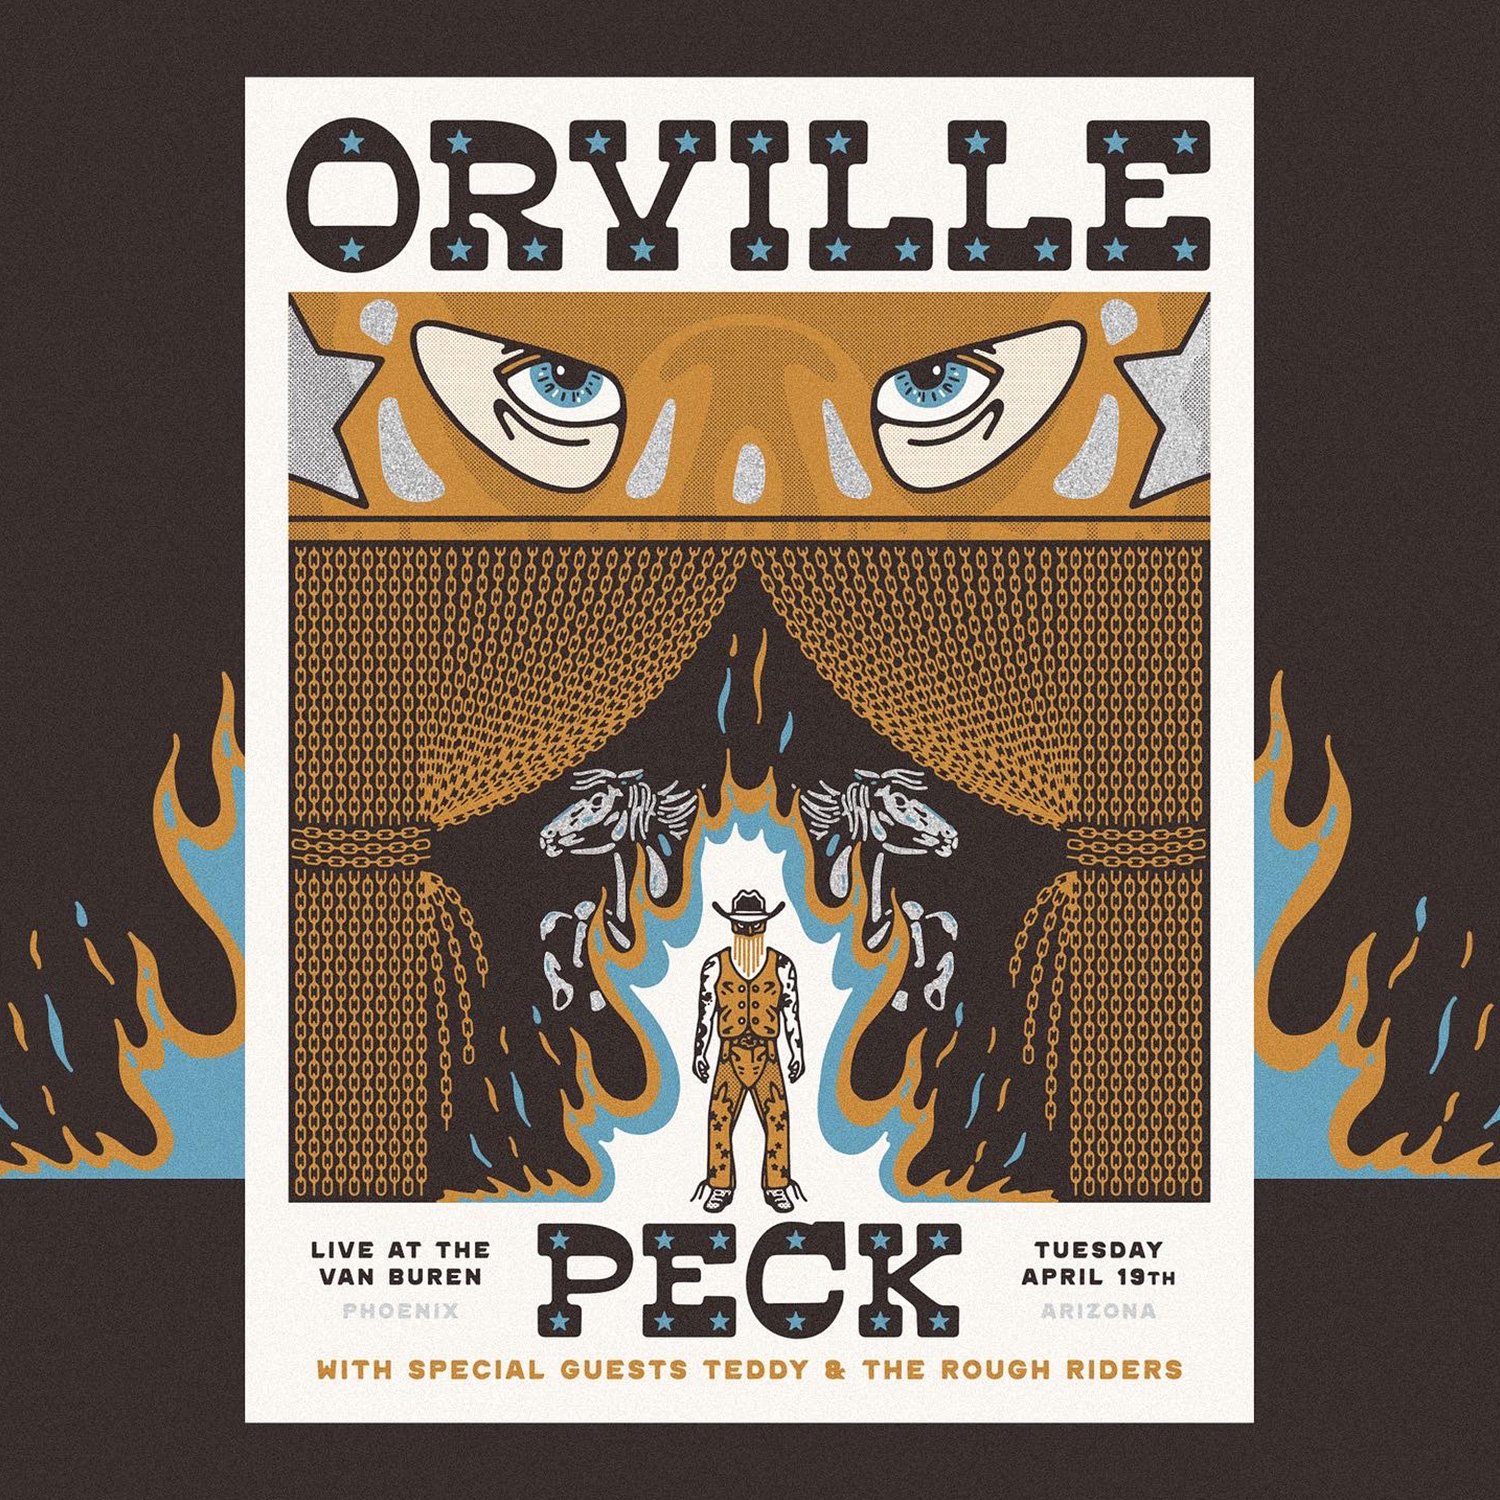  Orville Peck unused show poster design by Cactus Country 